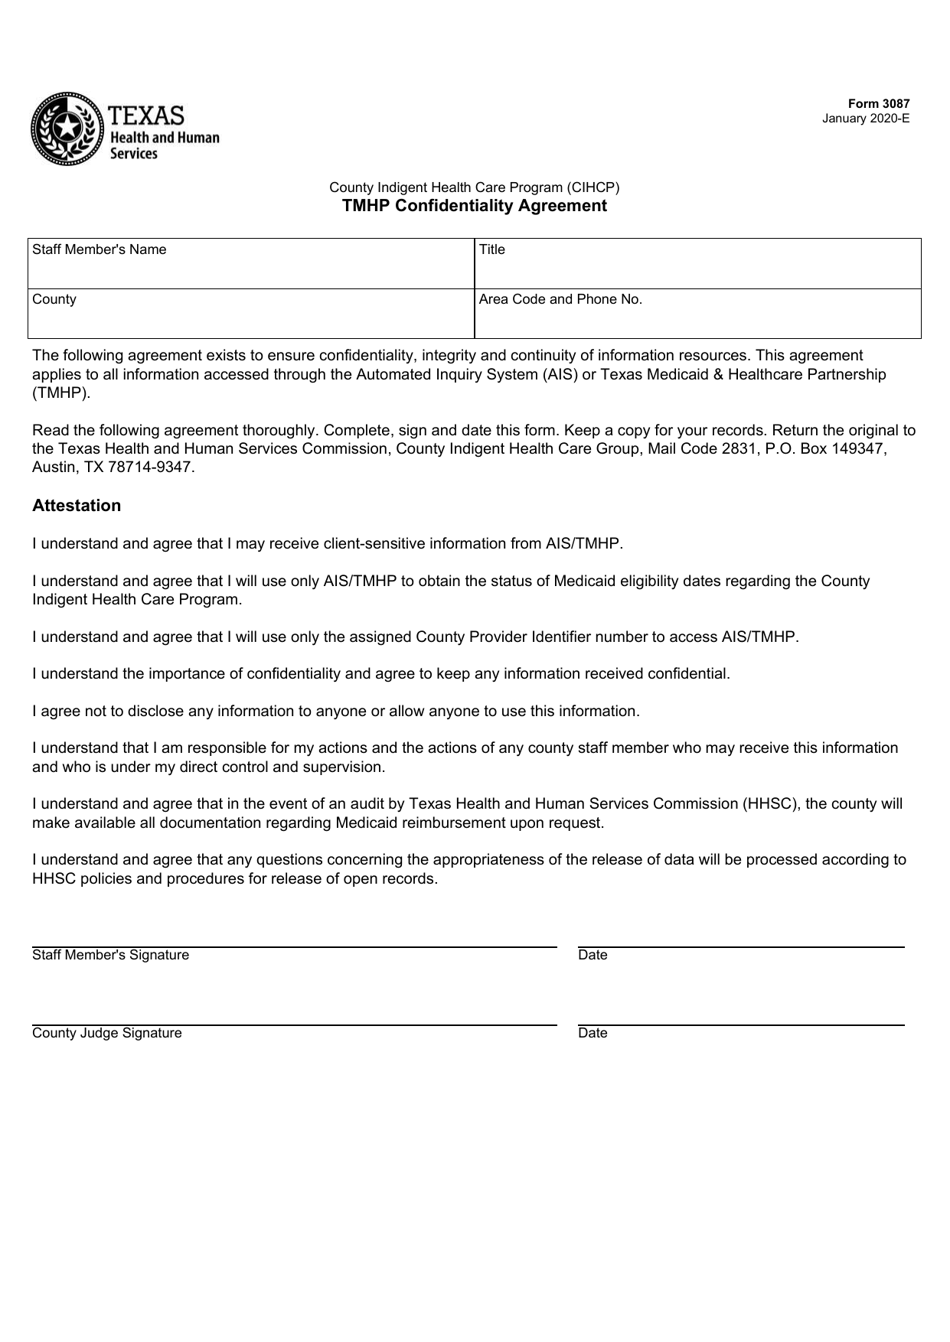 Form 3087 Tmhp Confidentiality Agreement - Texas, Page 1